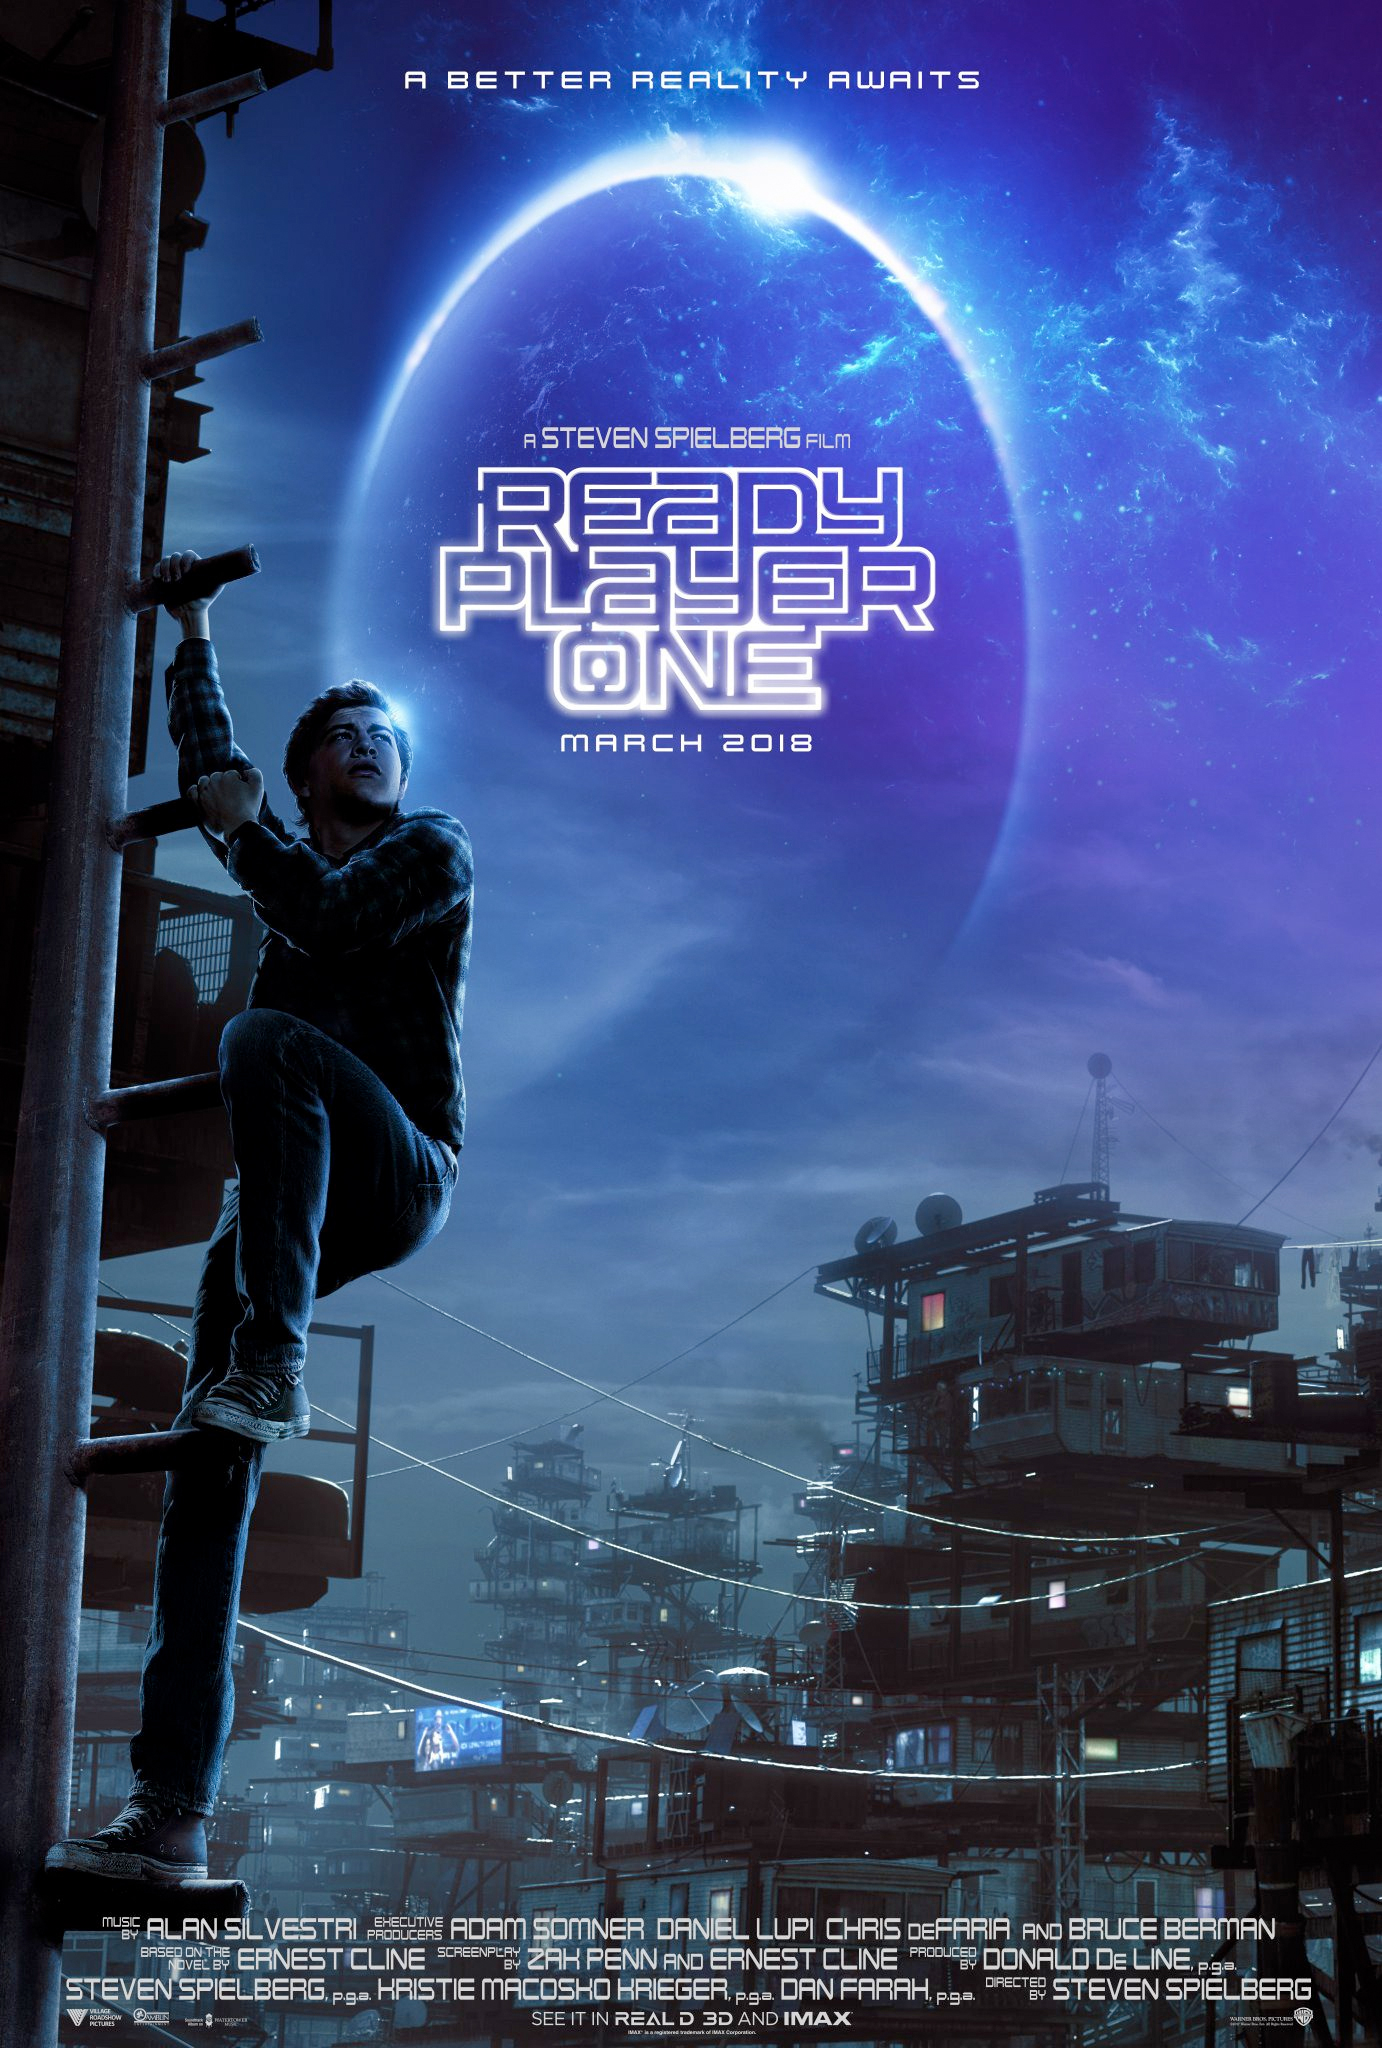 The New Ready Player One Trailer Provides Further Insights To The Story -  VR News, Games, And Reviews